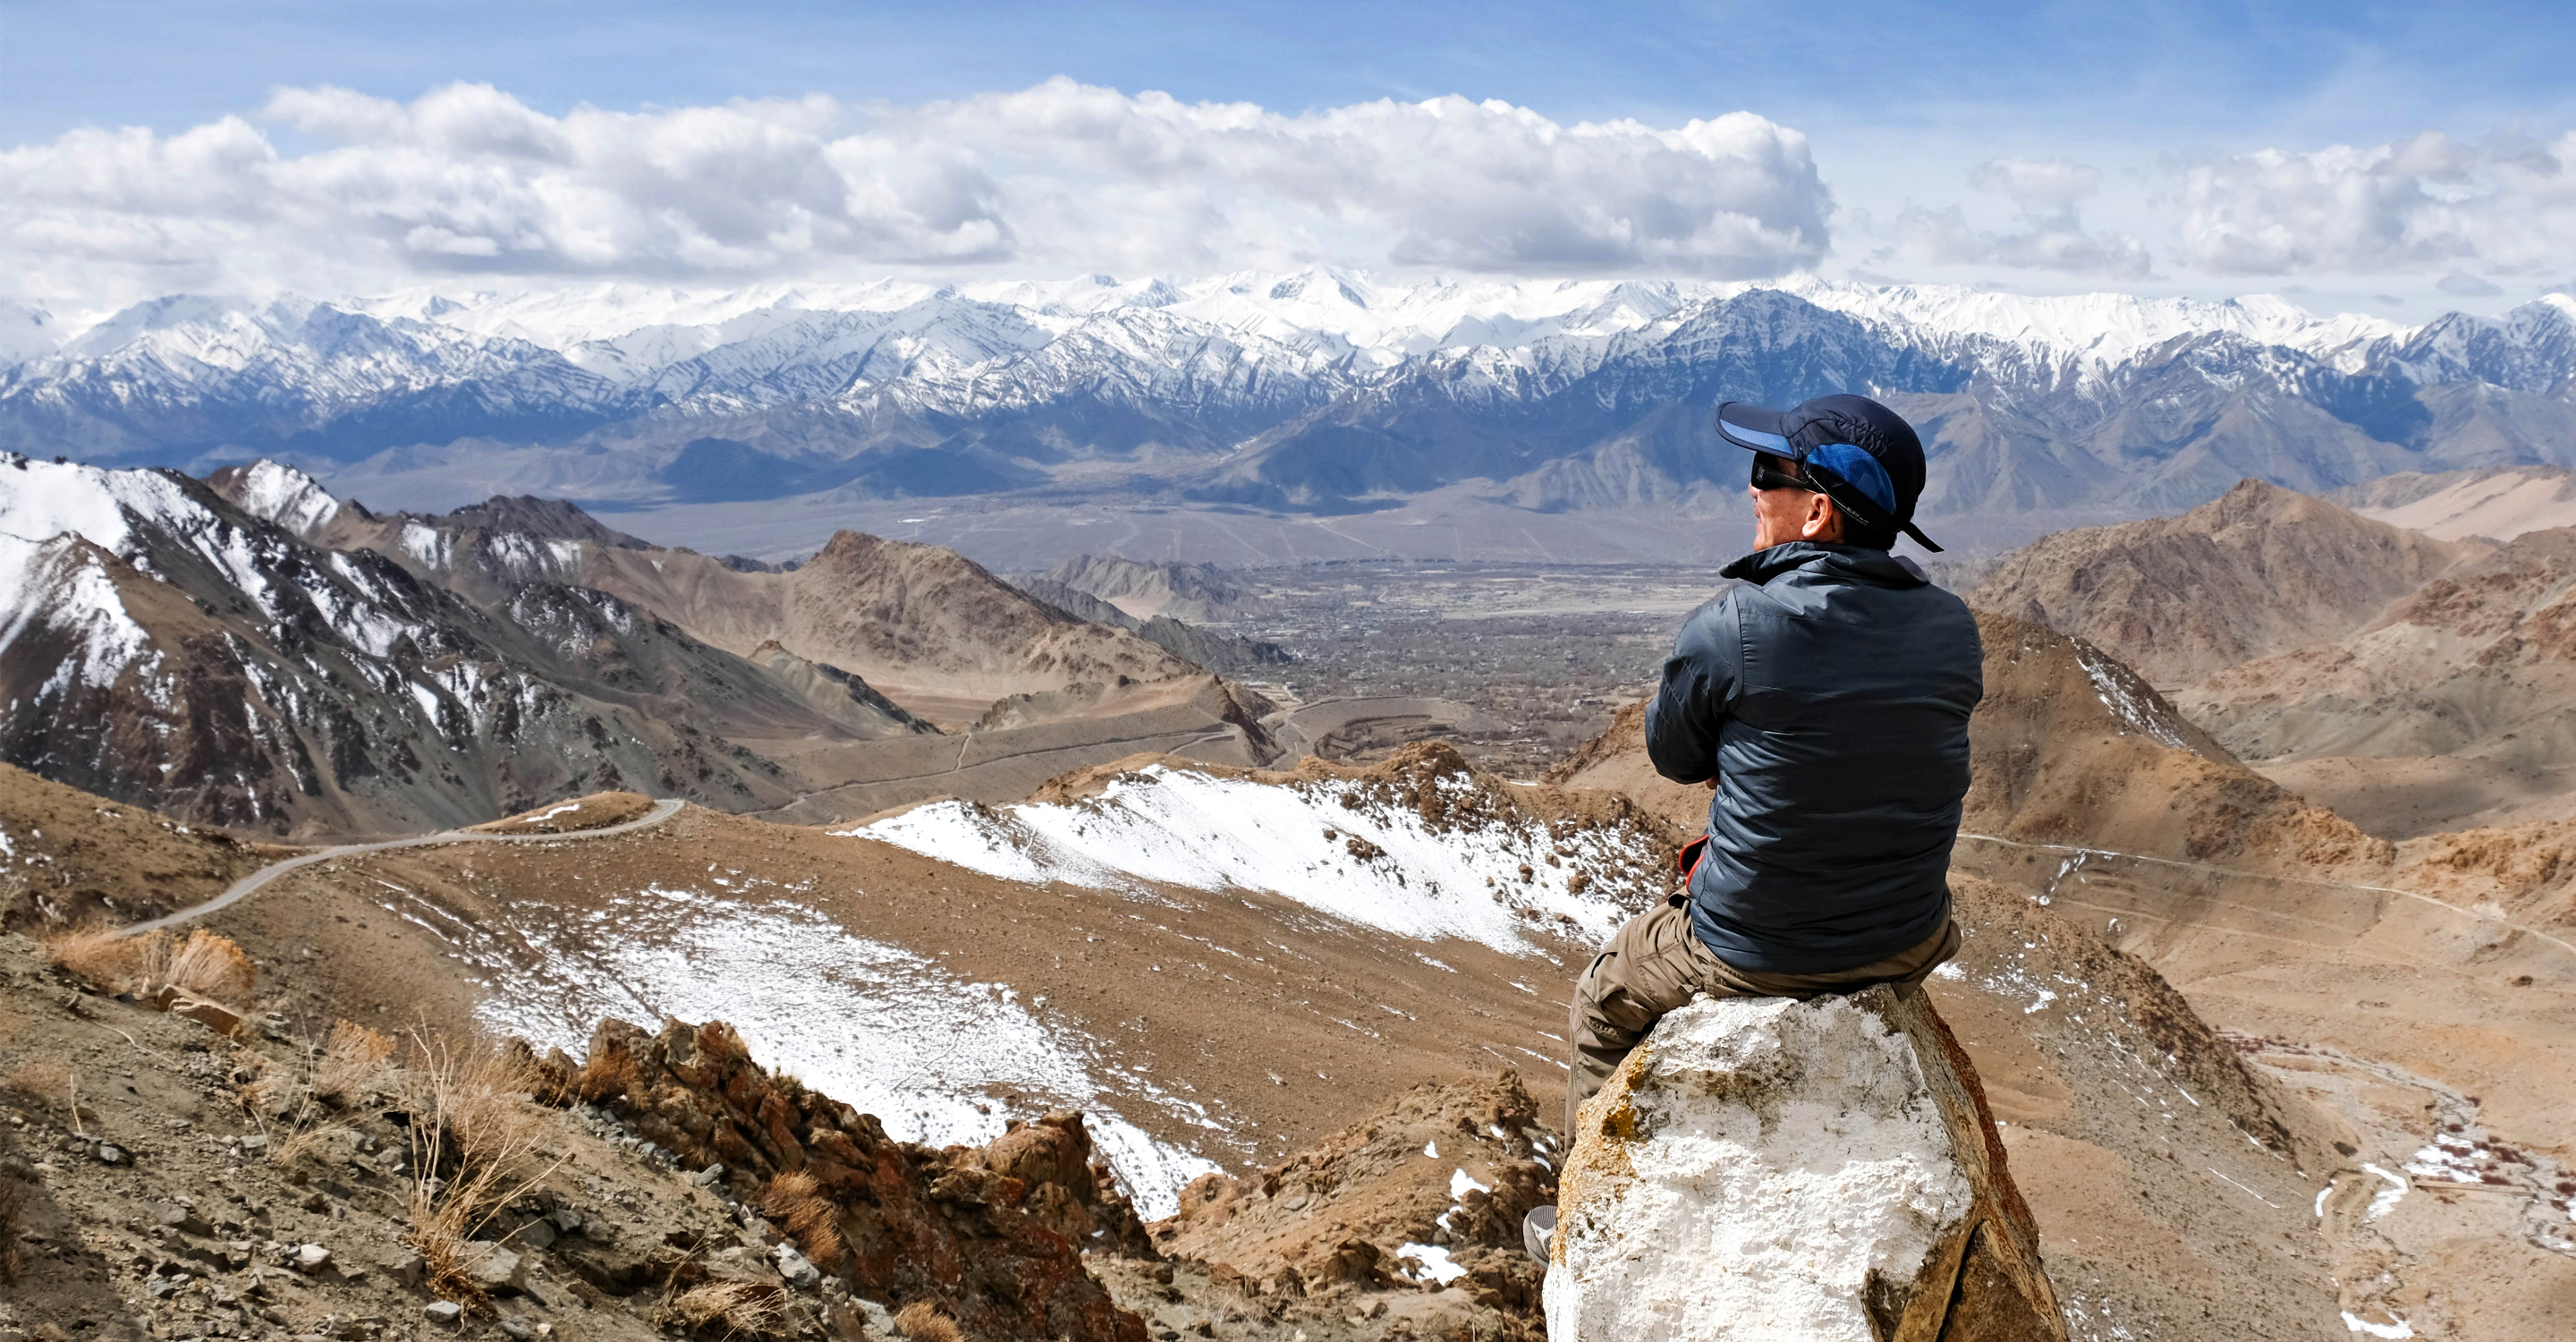 A man sits on a rock overlooking the Himalayan mountain range outside of Ladakh, India